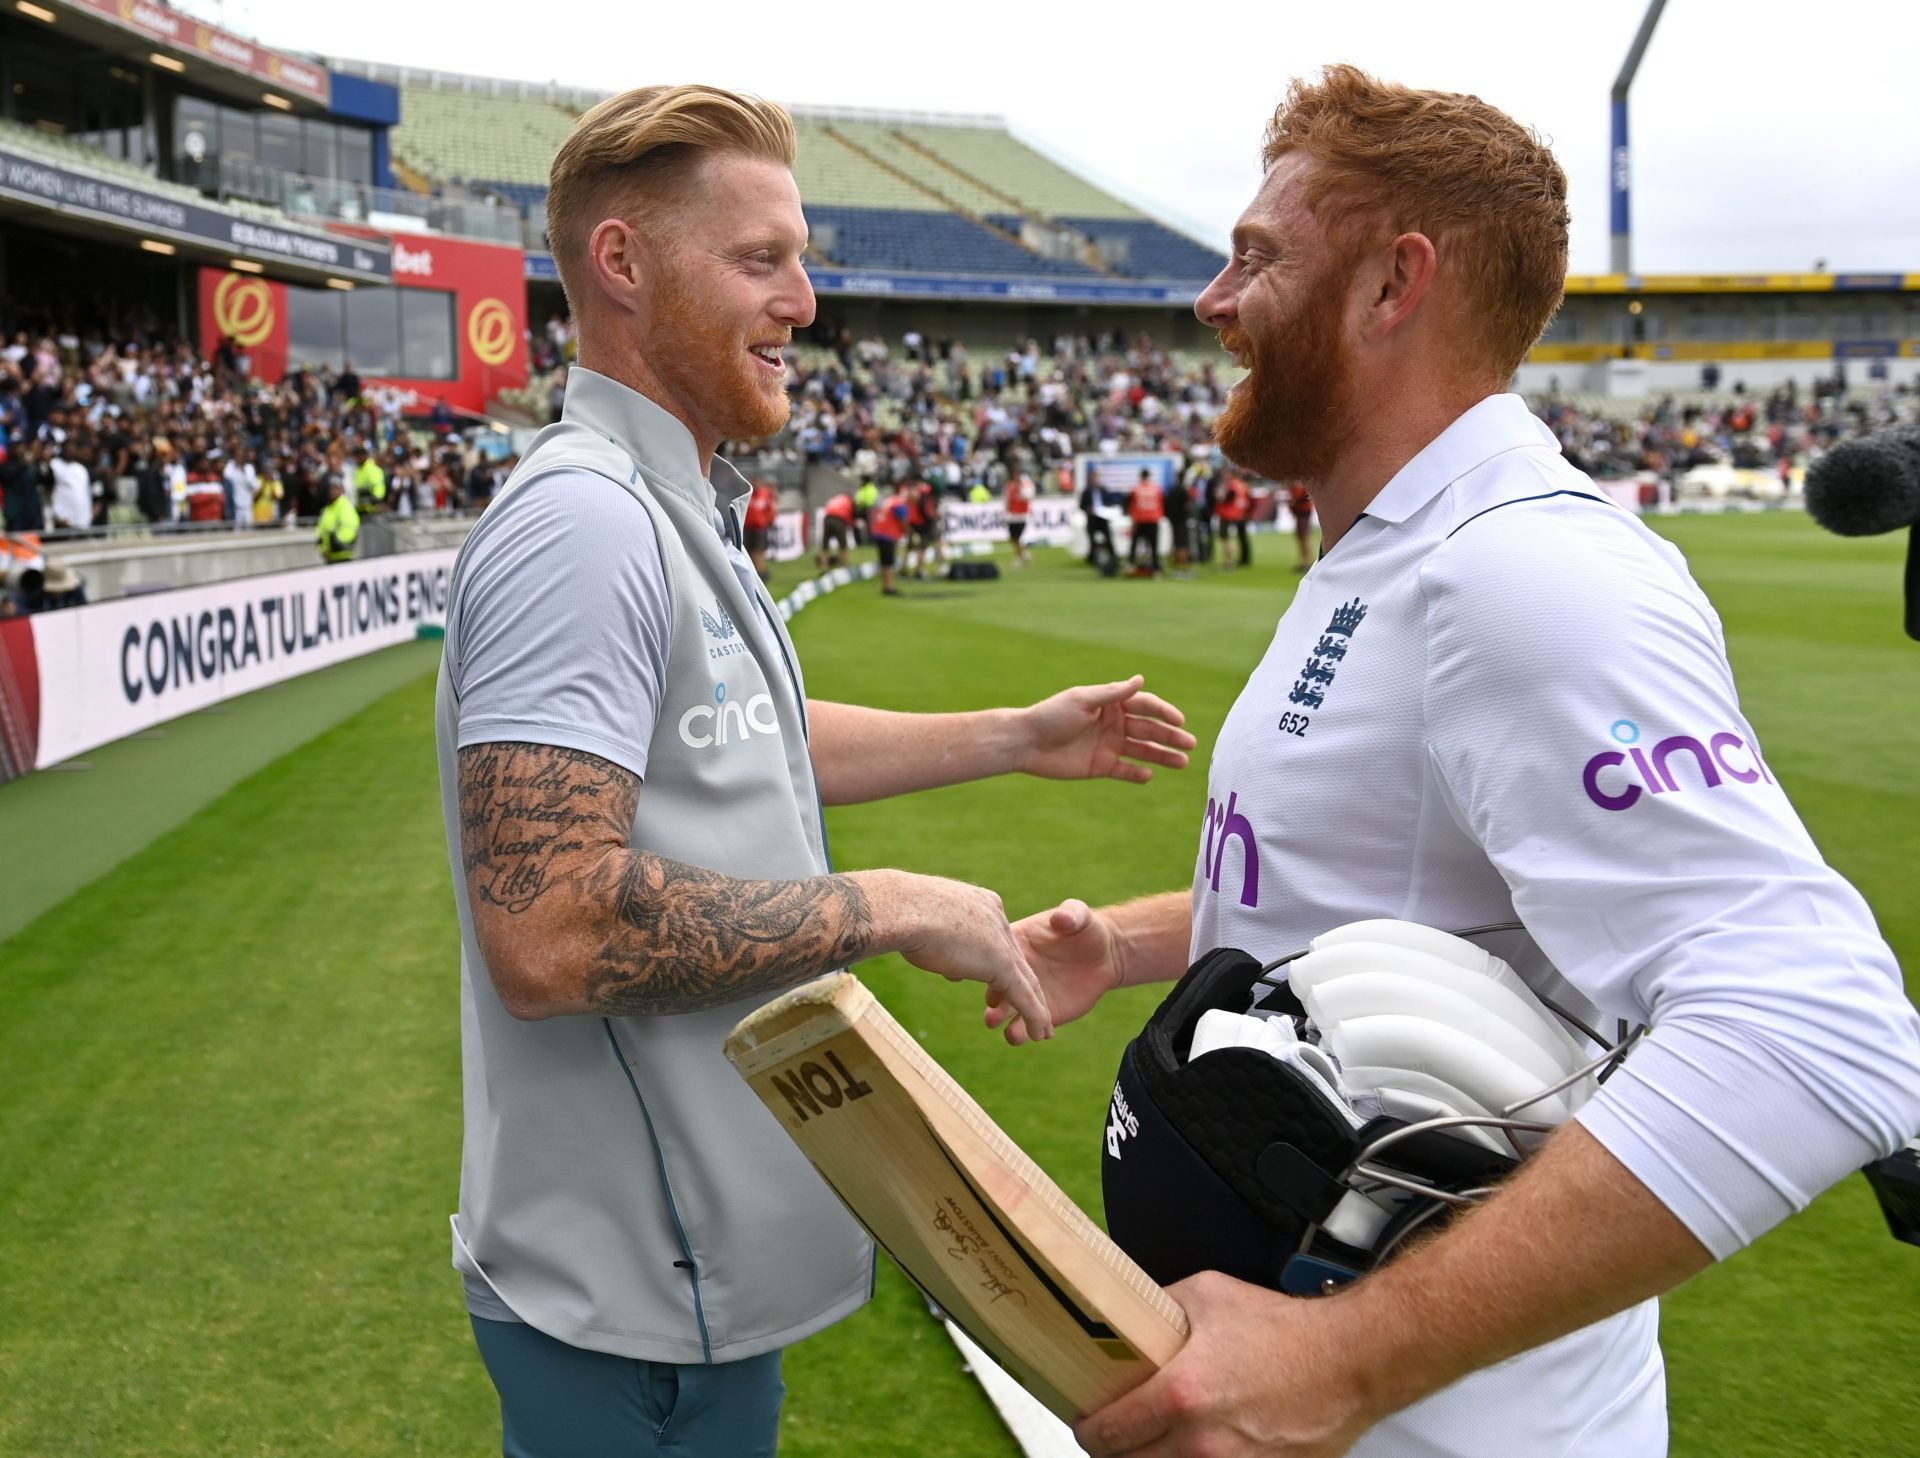 Ben Stokes and Jonny Bairstow. (Credits: Getty)